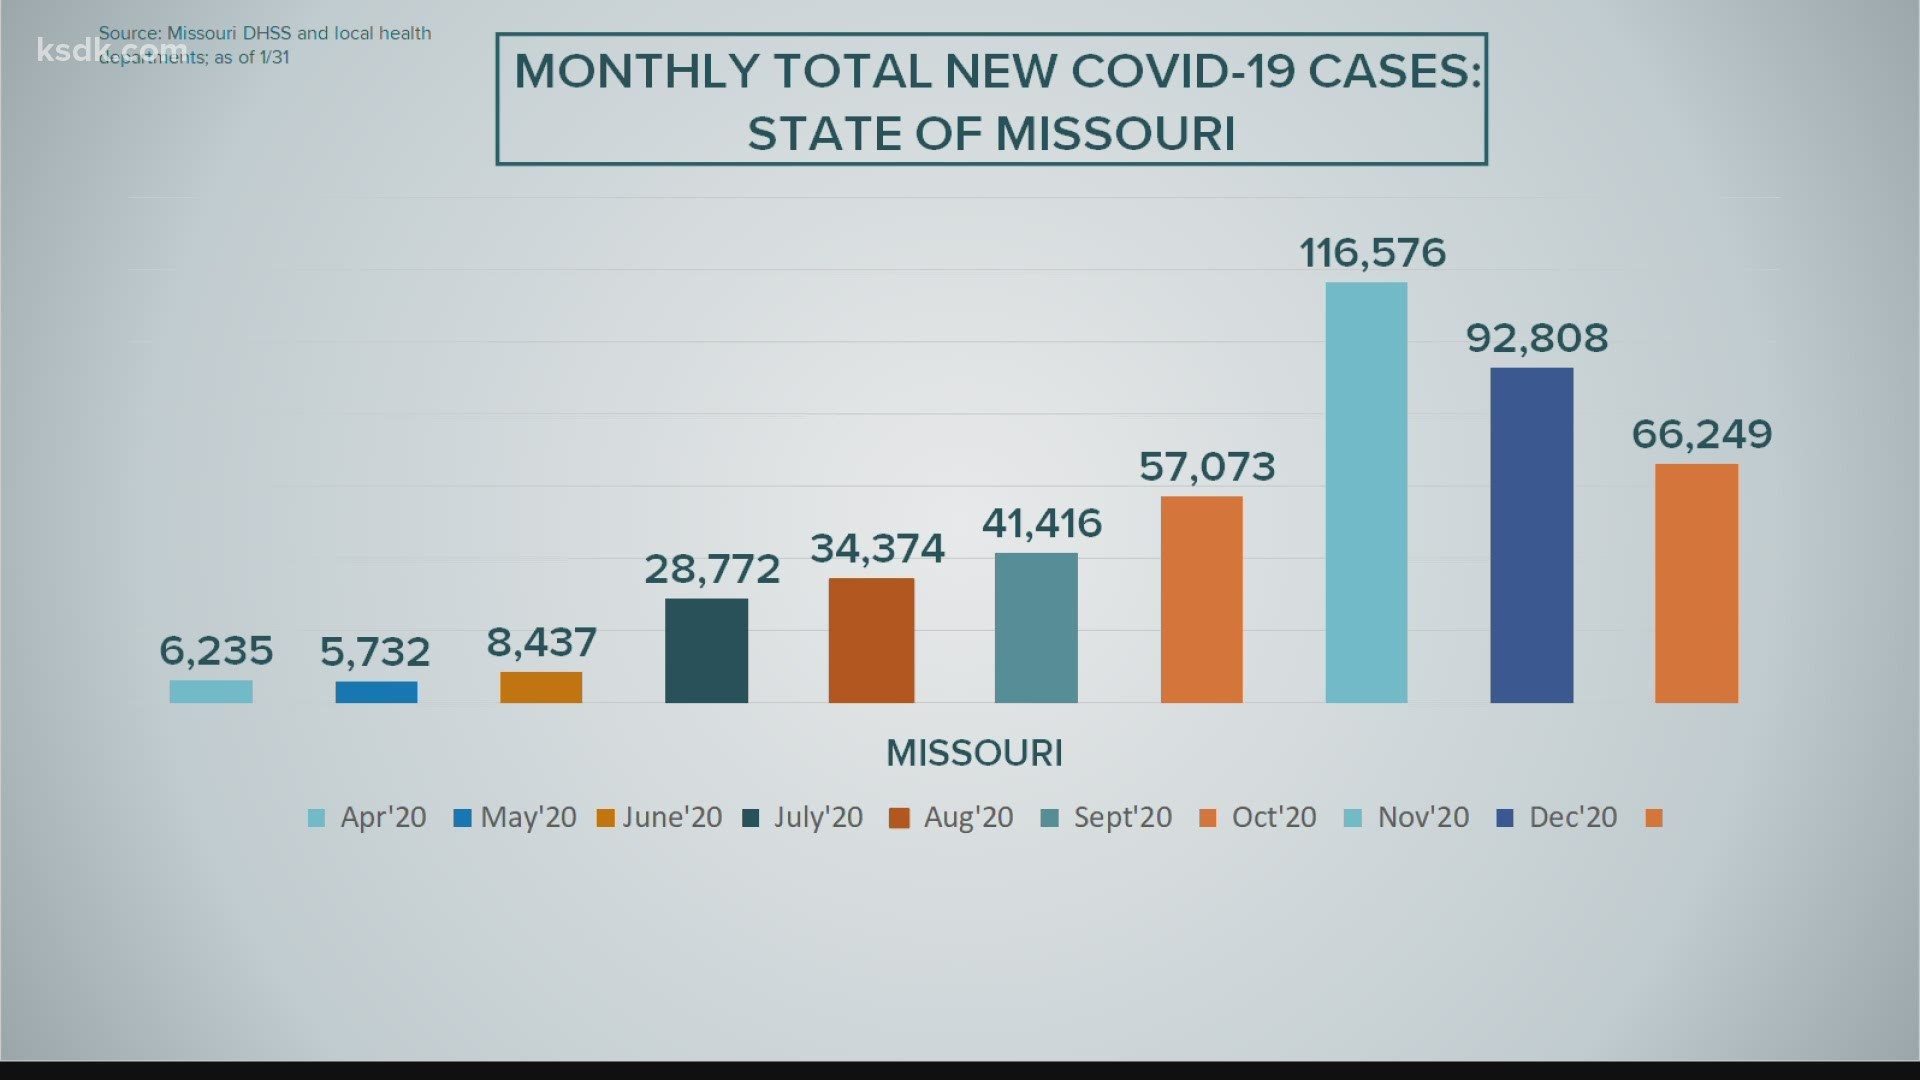 Covid-19 cases, deaths, and hospitalizations were all down in the month of January in Missouri, Illinois, and the St. Louis area